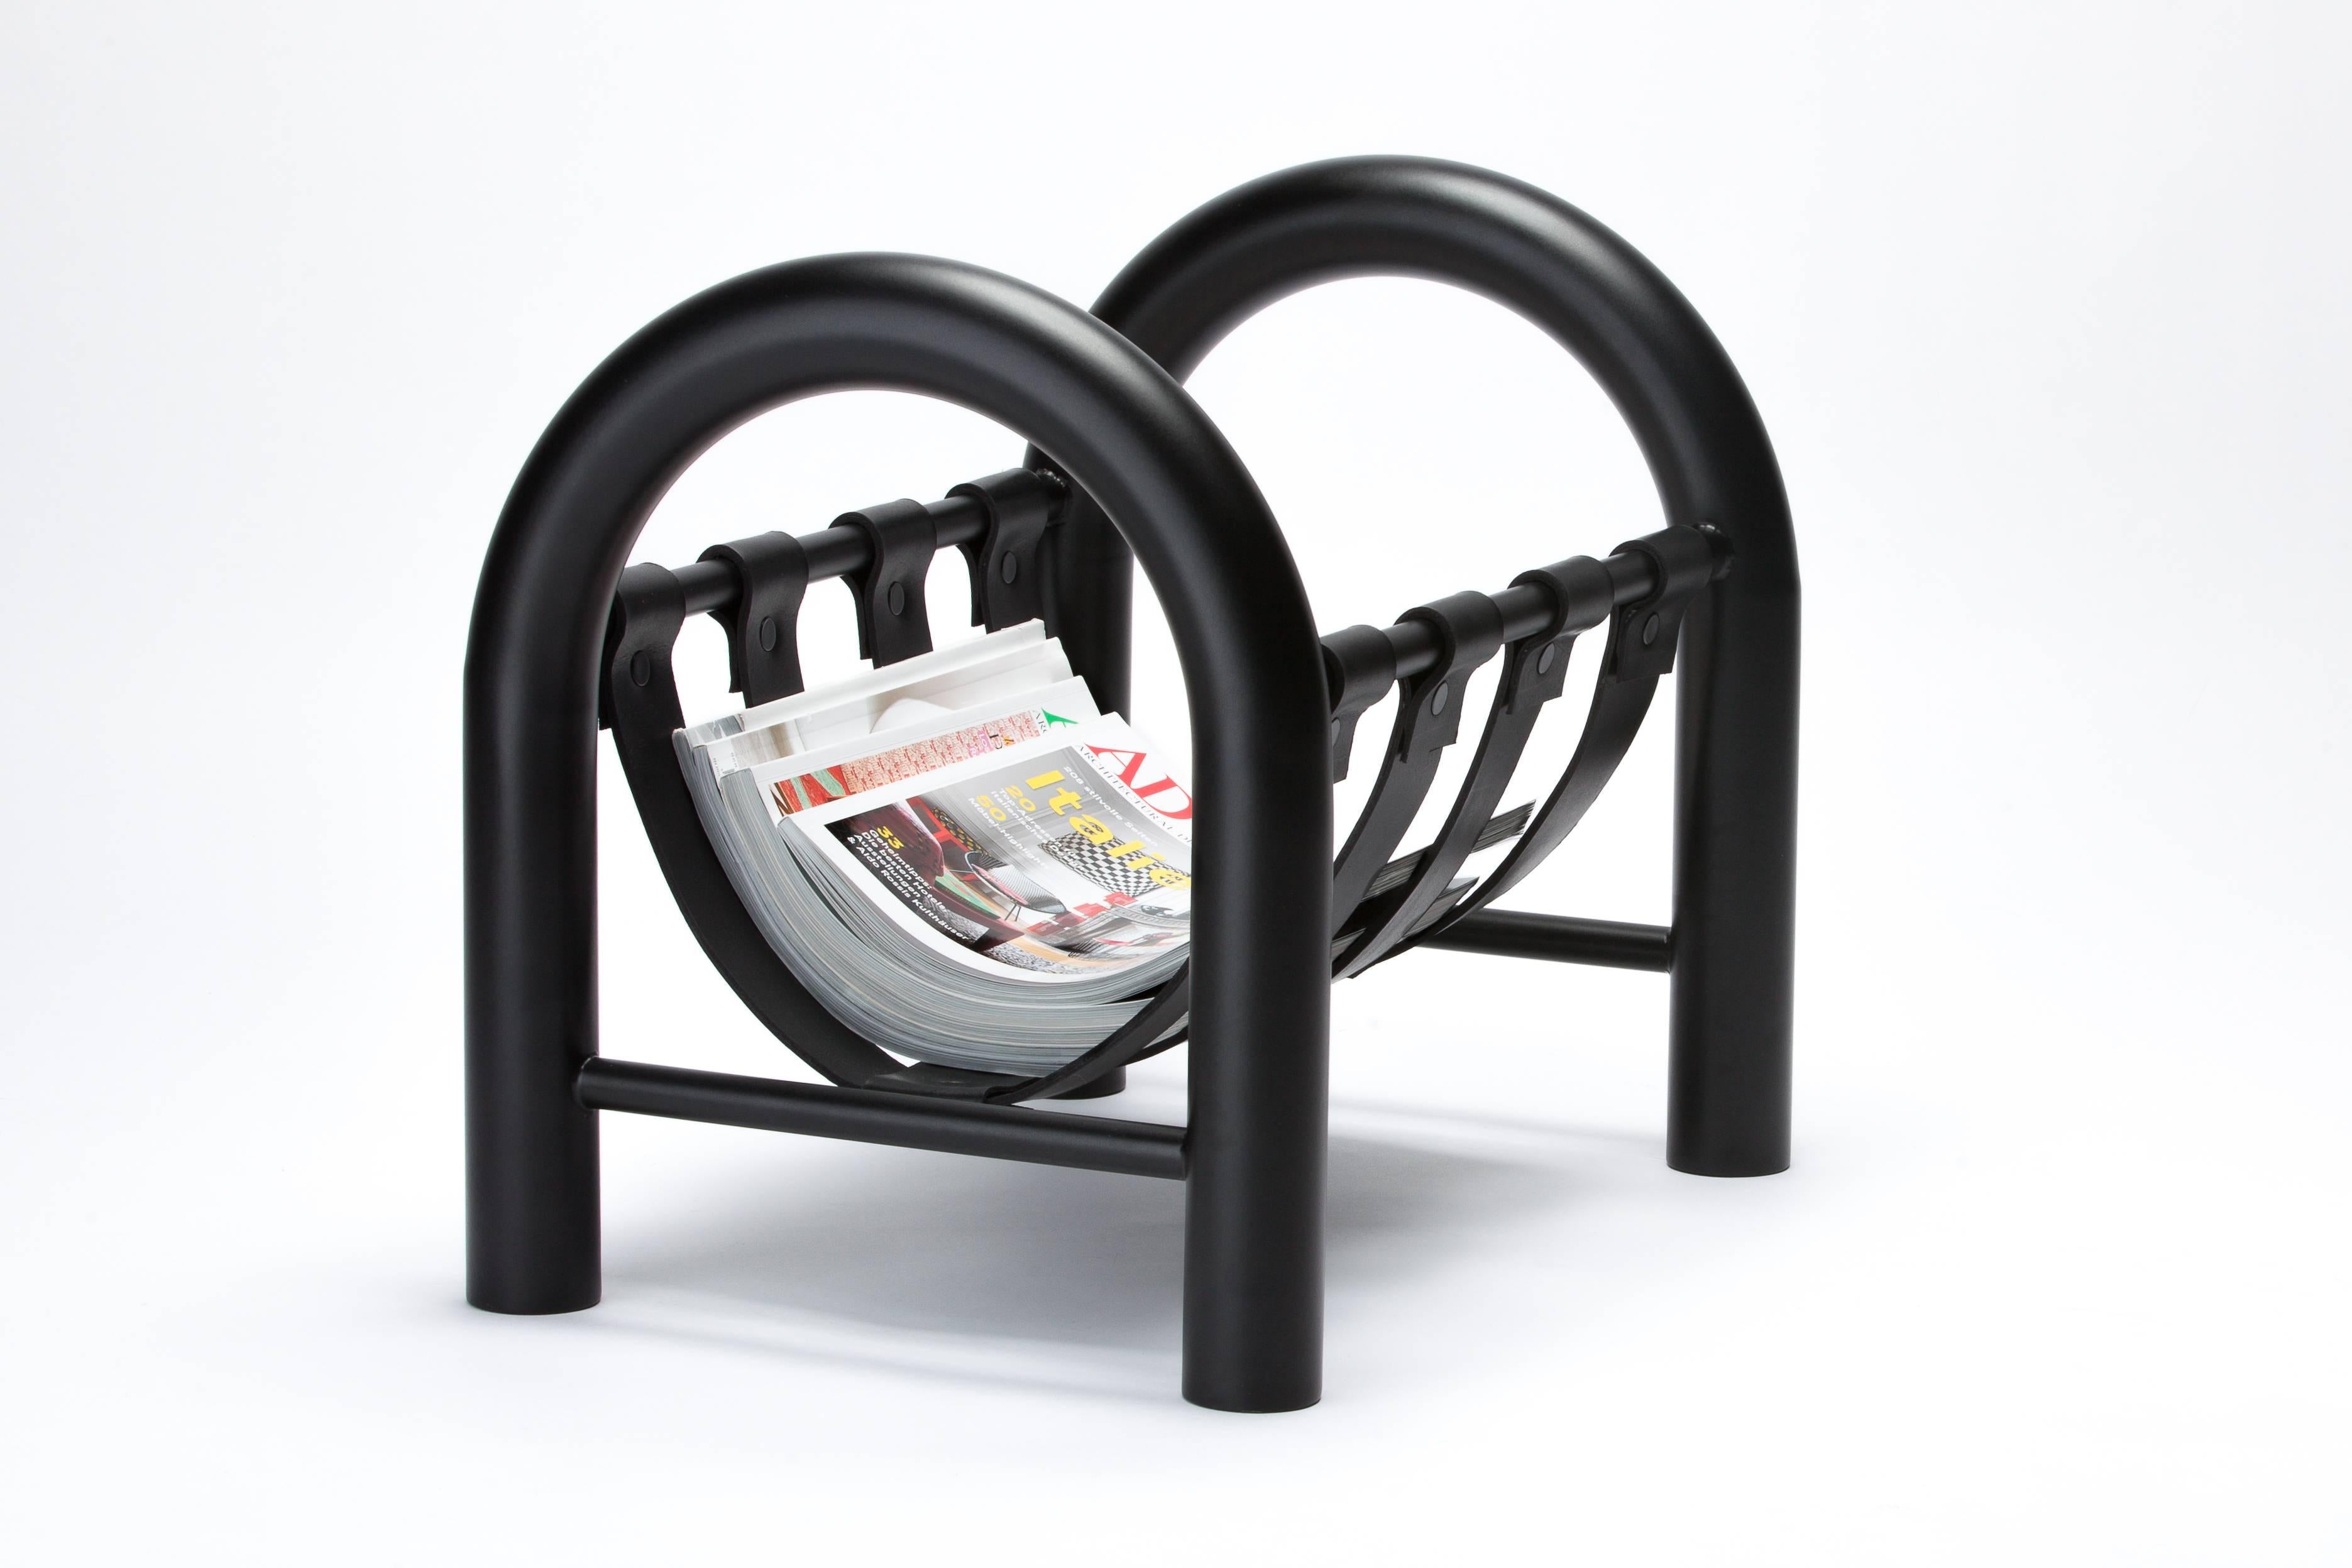 While the curves of the Tubular magazine rack are playful in form, the matte black finish and thick leather sling with black rivet detailing elevate the piece to a luxurious level. Tubular is a lightweight yet durable magazine rack perfect for